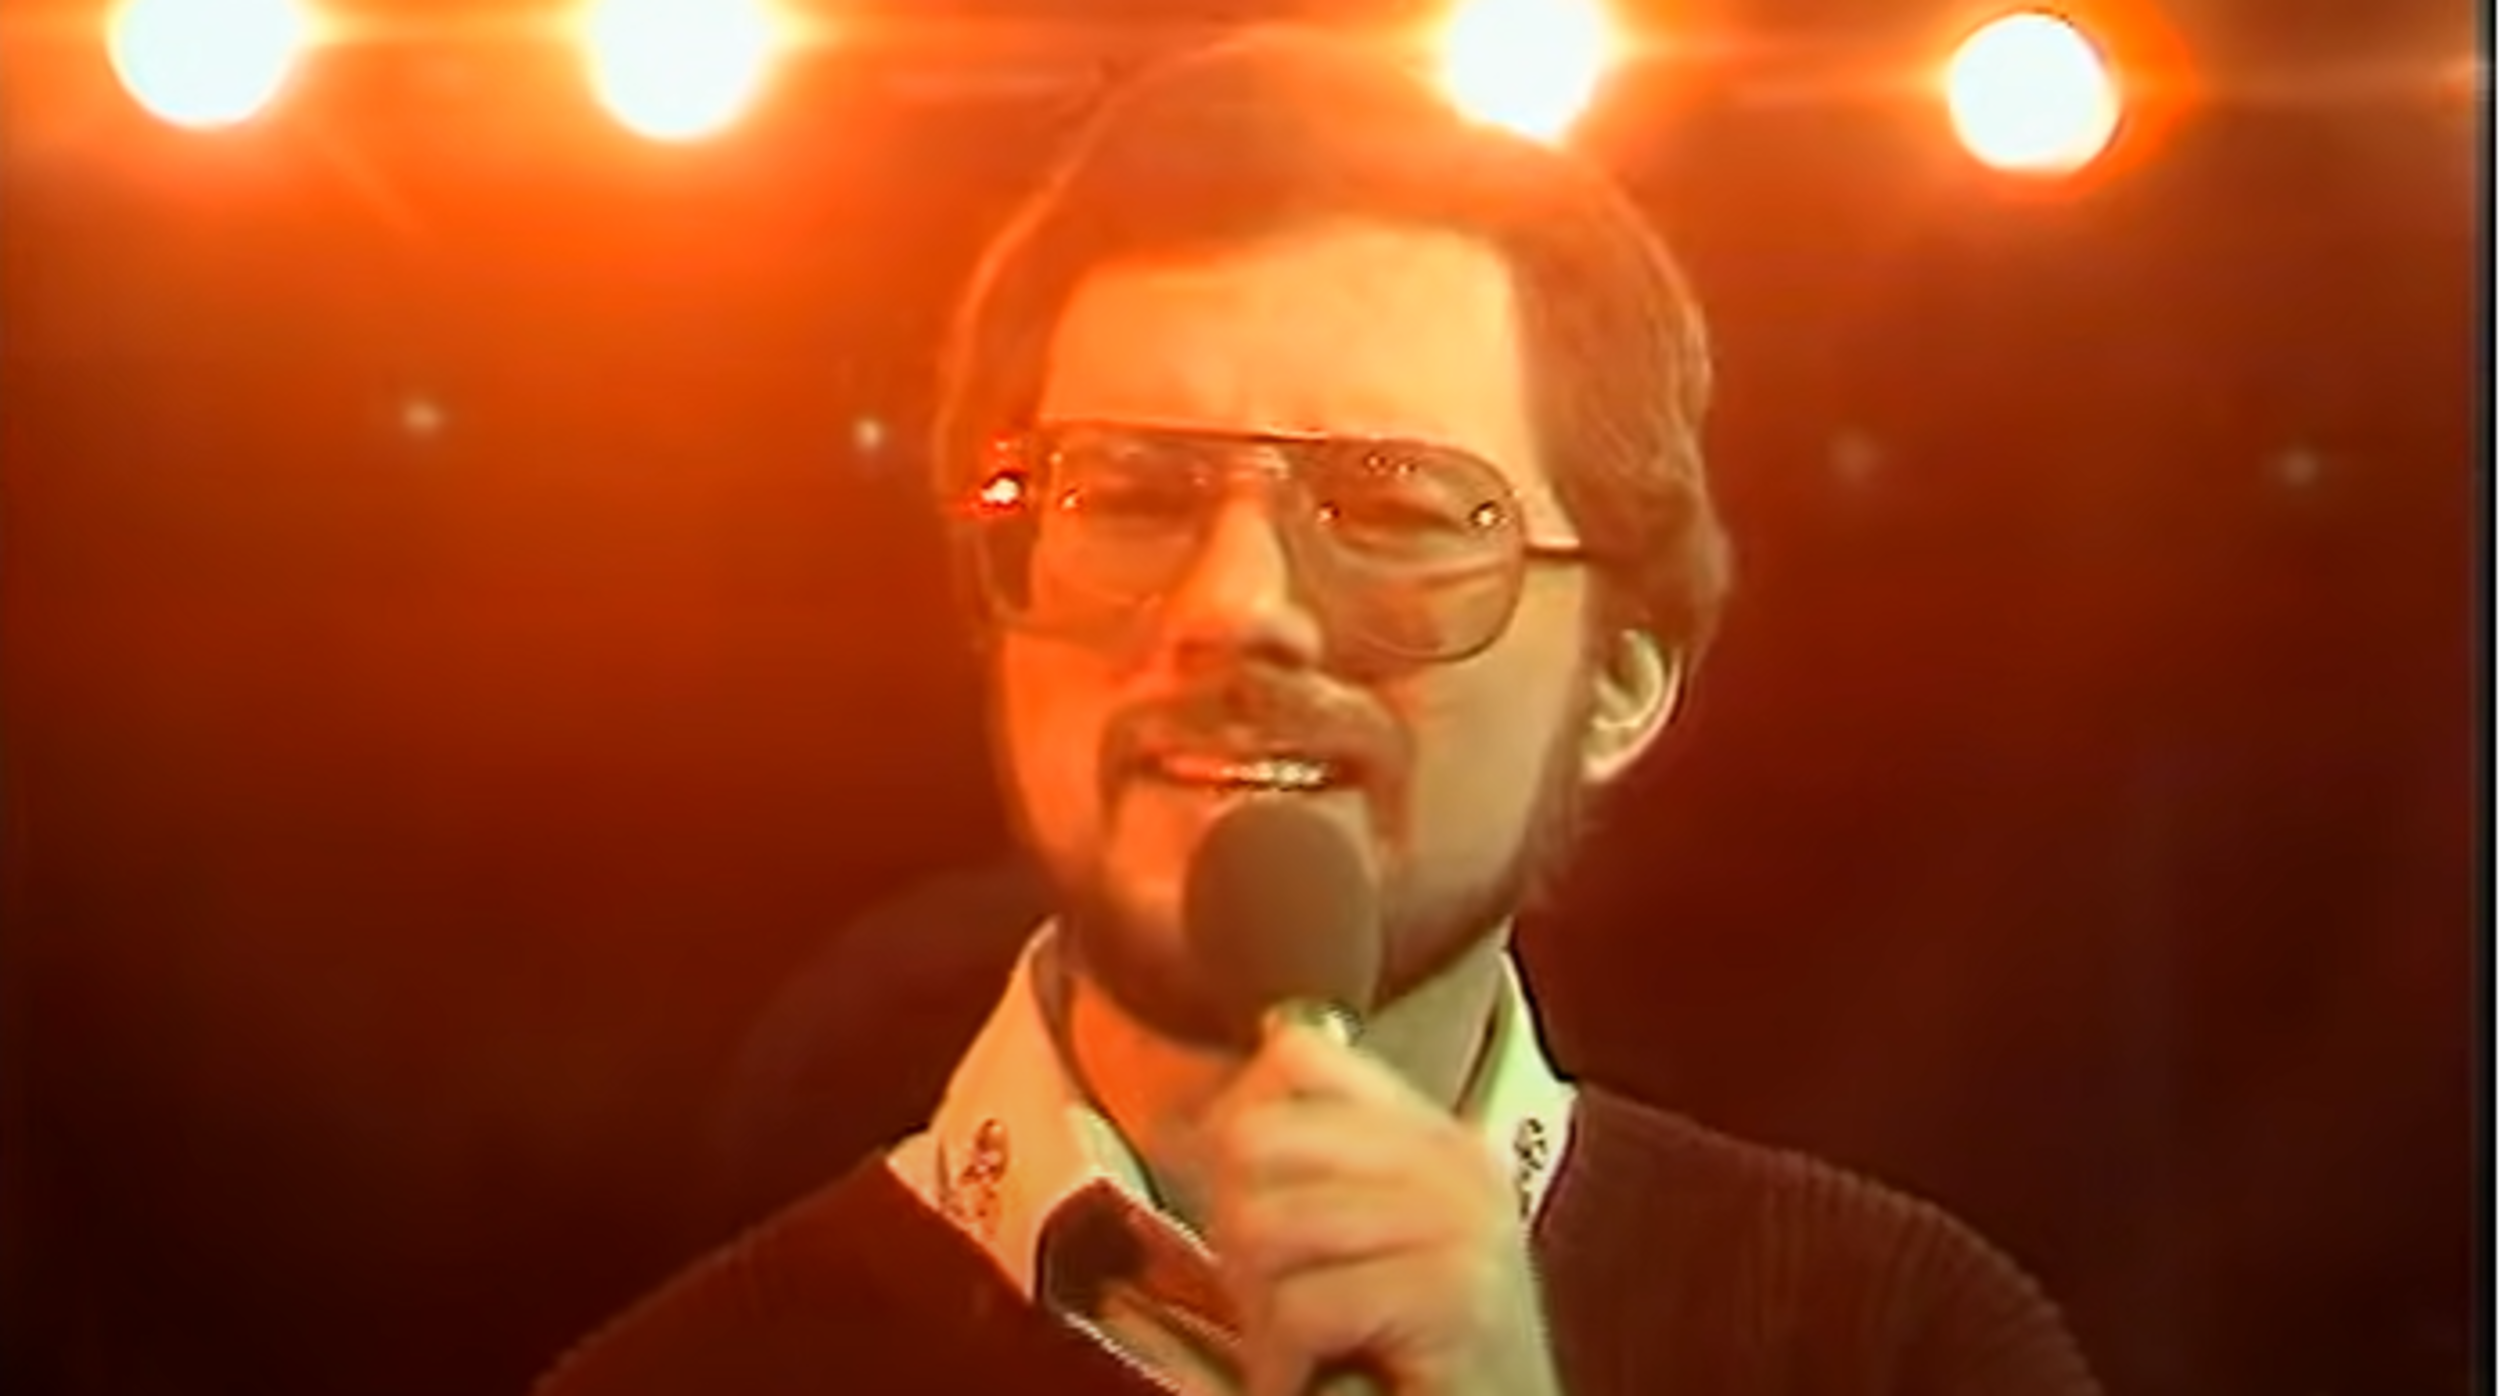 <p>This No.1 <em>Billboard</em> Hot 100 hit for England's Rupert Holmes has achieved a steady cult following over the years. Perhaps, because of the unique title and conjured images of some warm, beach-laden paradise. Yacht rock's association with summer, water, and care-free living, as a backdrop to a romantic story, is one of its appealing aspects. This <a href="https://www.youtube.com/watch?v=zROIlspgOjM">song is about a couple who ultimately patch up a rough relationship through personal ads</a>. Any time somebody of a certain age sips one of these drinks, ideally at some Caribbean resort with the warm winds off the ocean blowing, "The Pina Colada Song" should come to mind.</p><p>You may also like: <a href='https://www.yardbarker.com/entertainment/articles/the_definitive_led_zeppelin_playlist_102823/s1__35994551'>The definitive Led Zeppelin playlist</a></p>